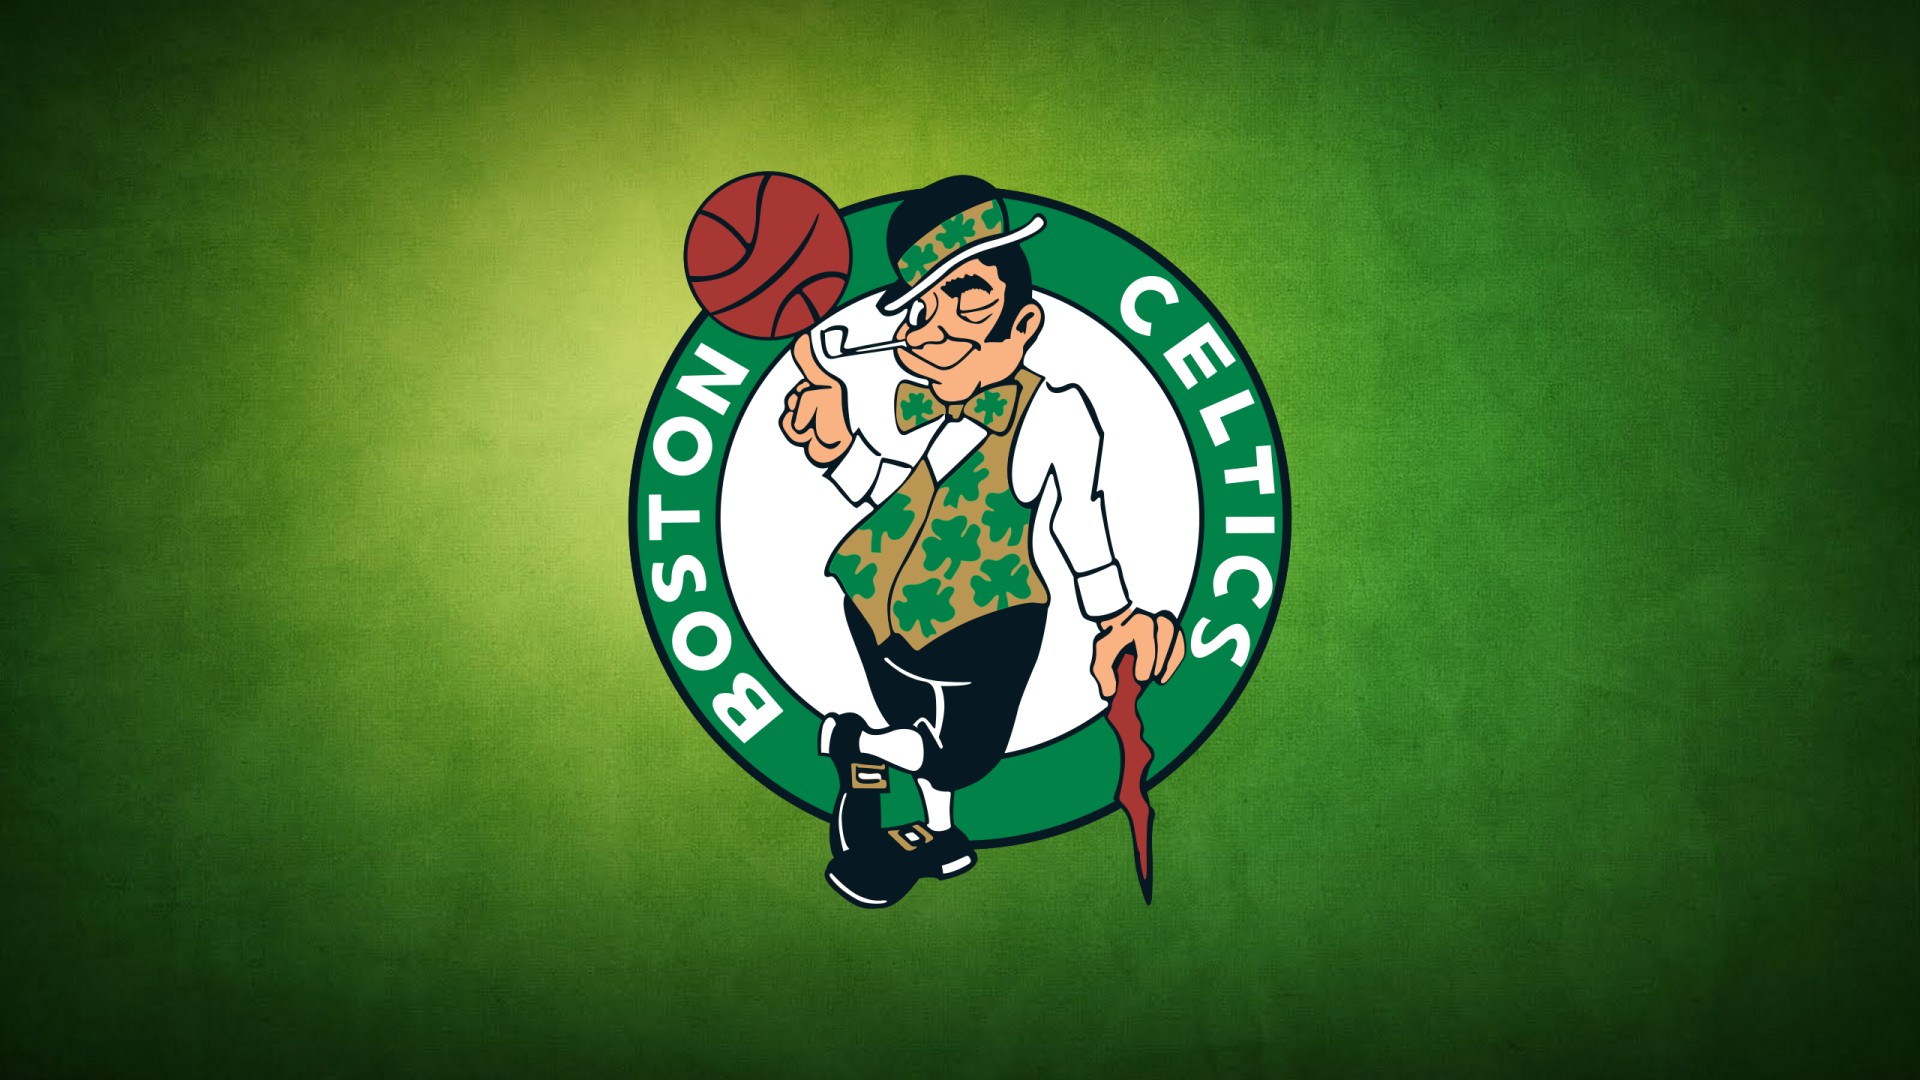 Boston Celtics Desktop Wallpaper with image dimensions 1920x1080 pixel. You can make this wallpaper for your Desktop Computer Backgrounds, Windows or Mac Screensavers, iPhone Lock screen, Tablet or Android and another Mobile Phone device